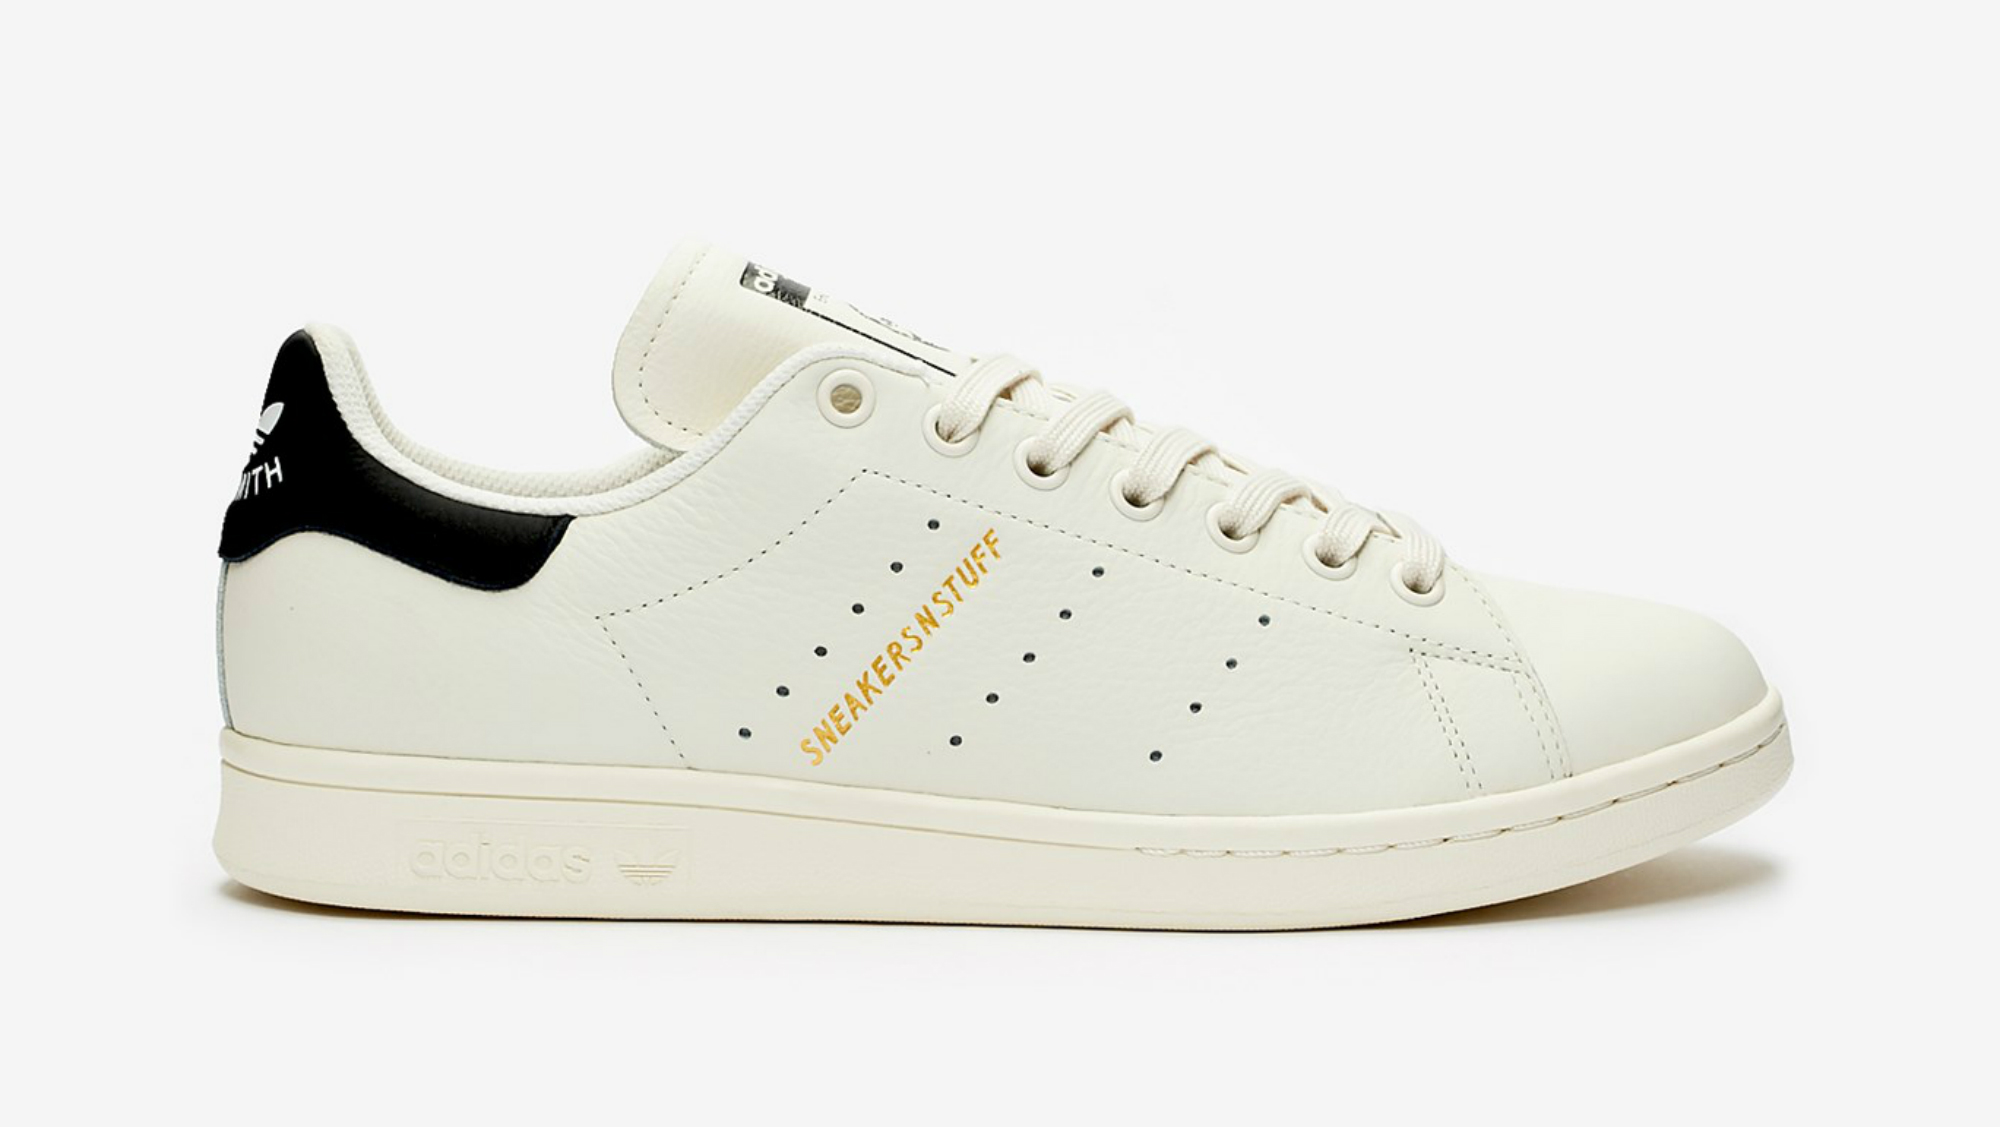 is the s silent in adidas sneakers for women | Release Dates, Prices & | Adidas, Sneakersnstuff x Adidas Stan Smith Core White/Core Metallic | Sneaker Calendar